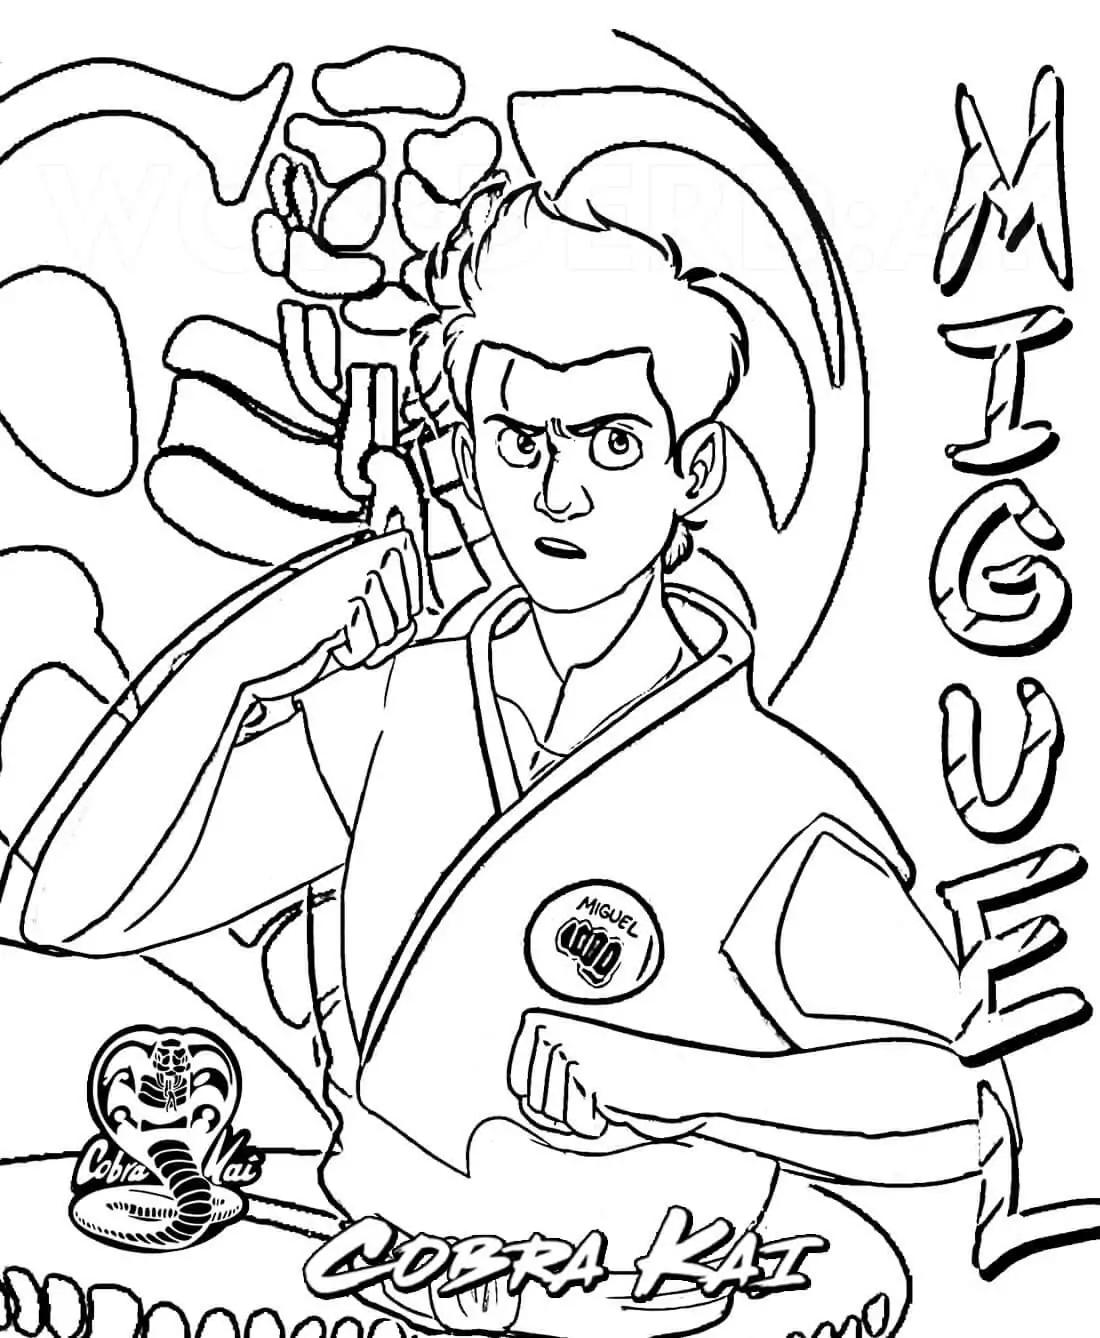 Miguel from Cobra Kai coloring page